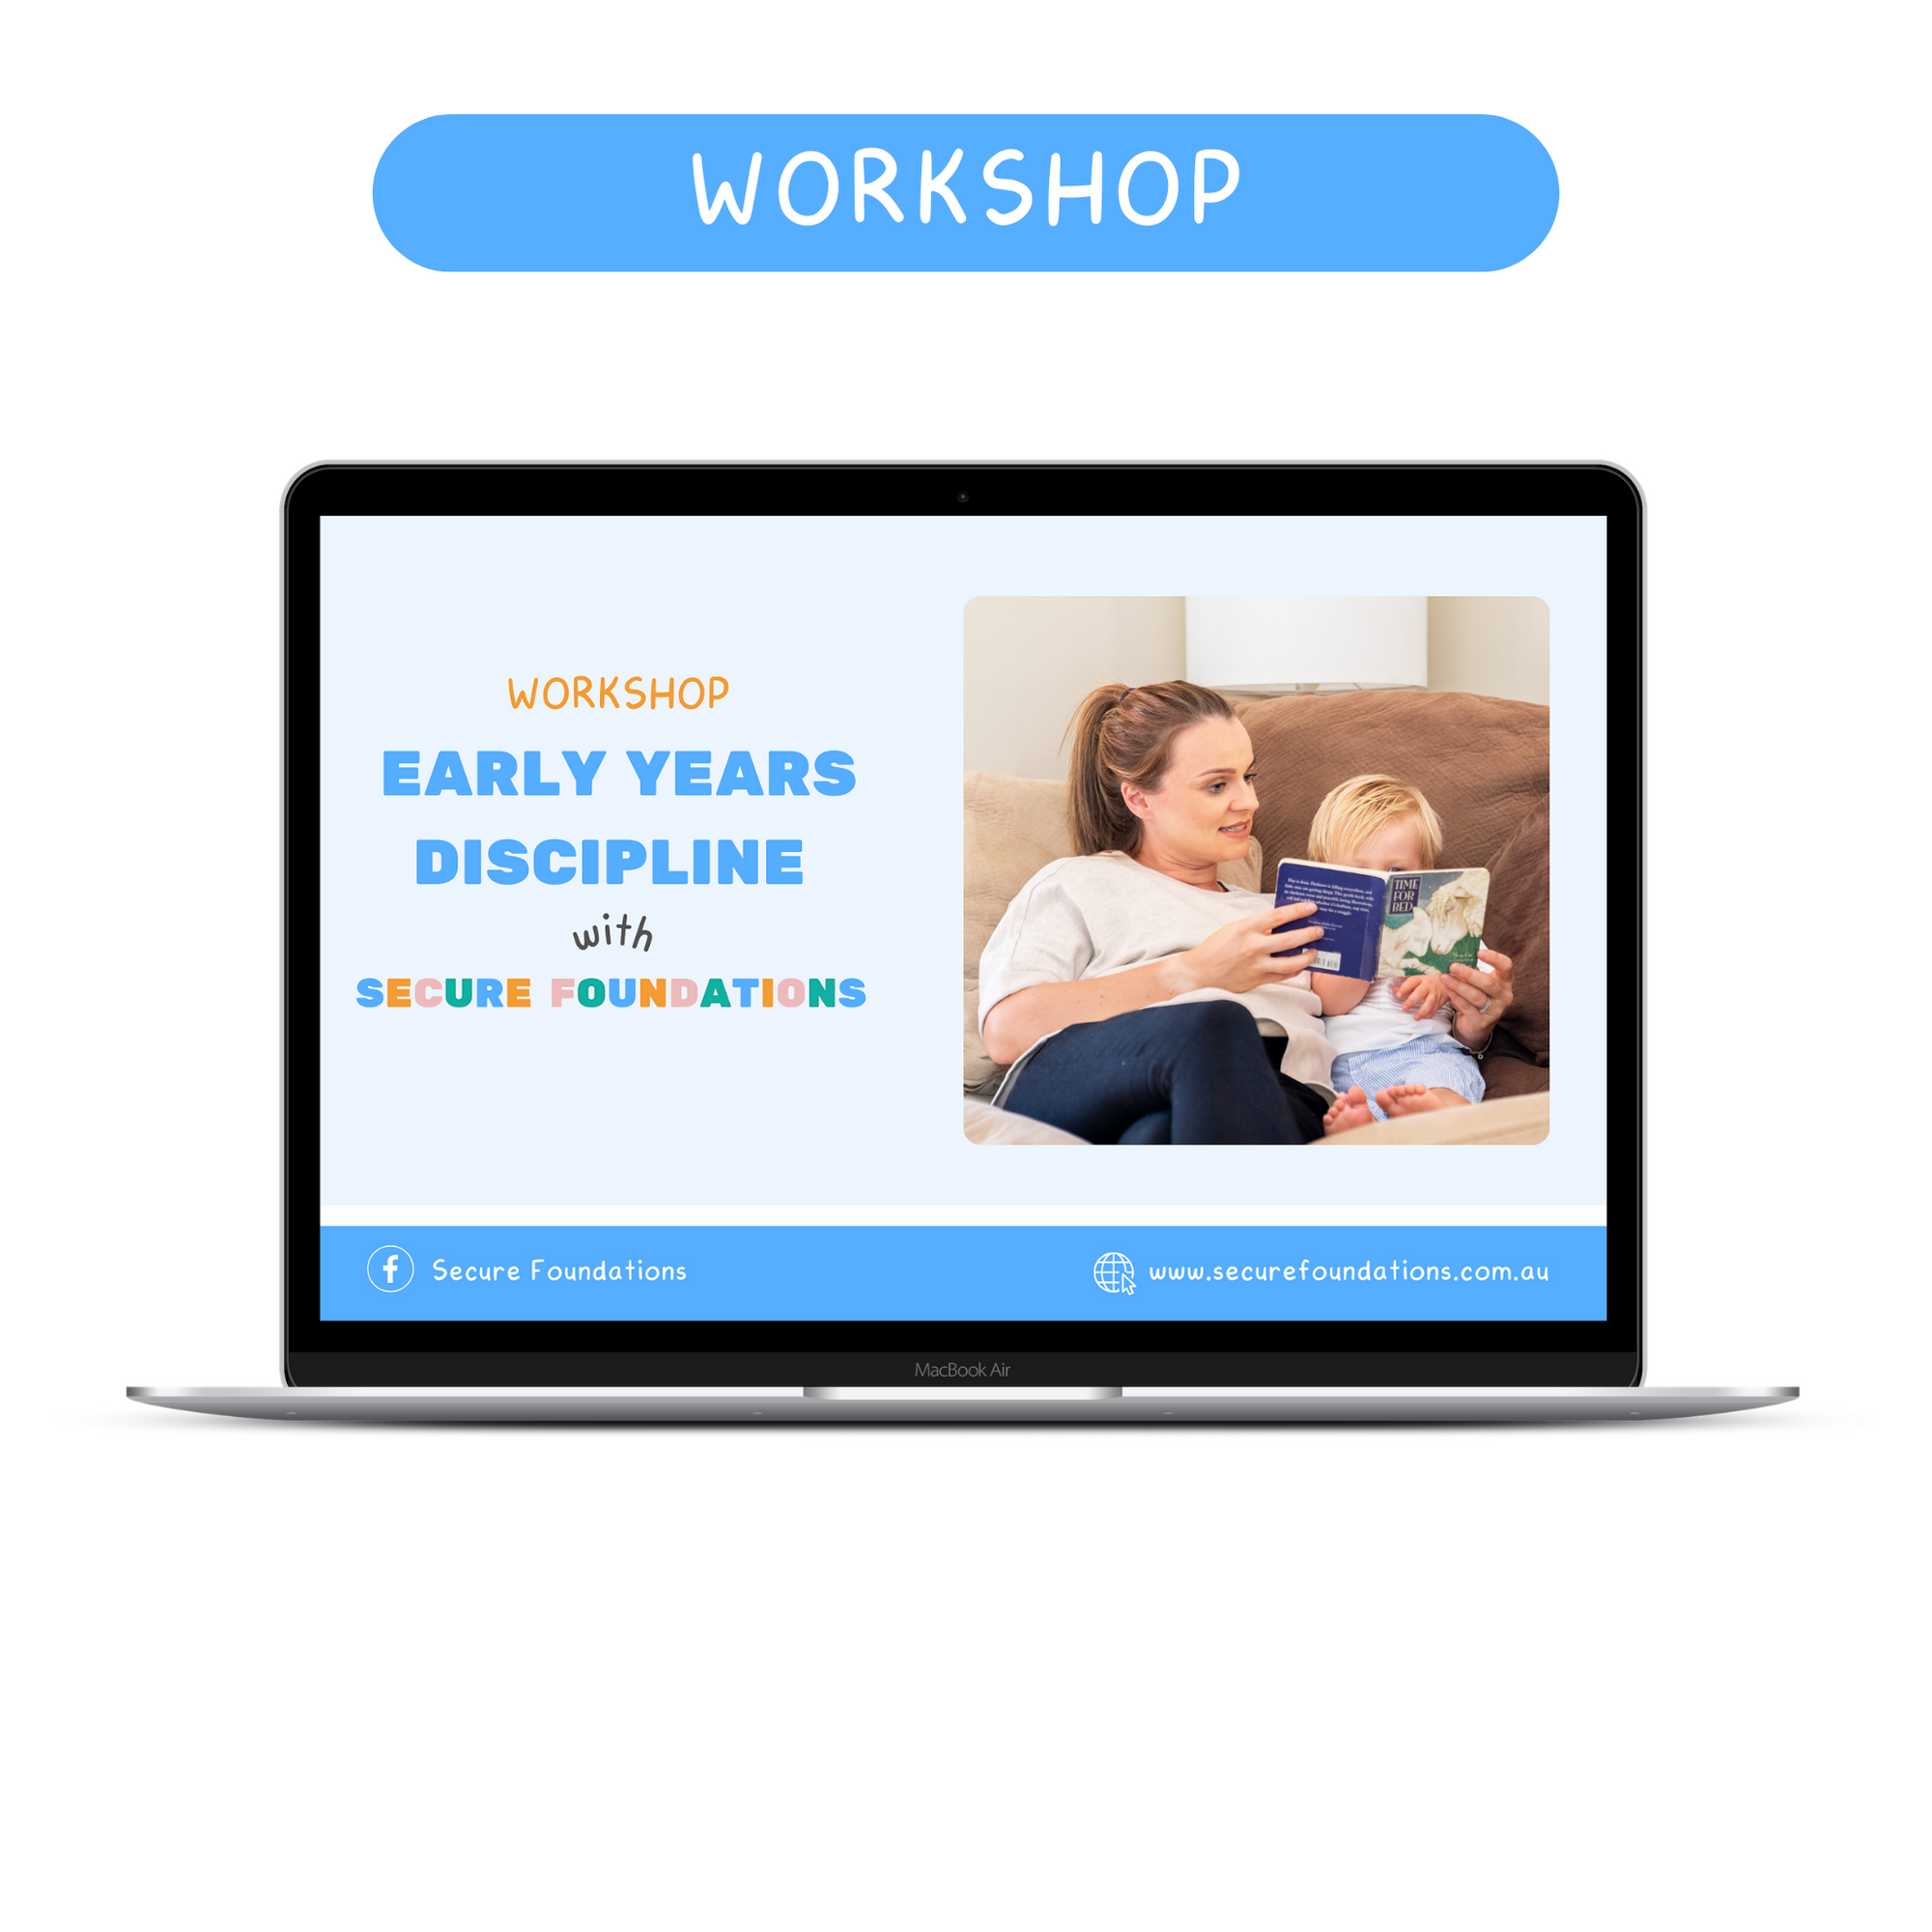 Workshop: Early years discipline with Secure Foundations